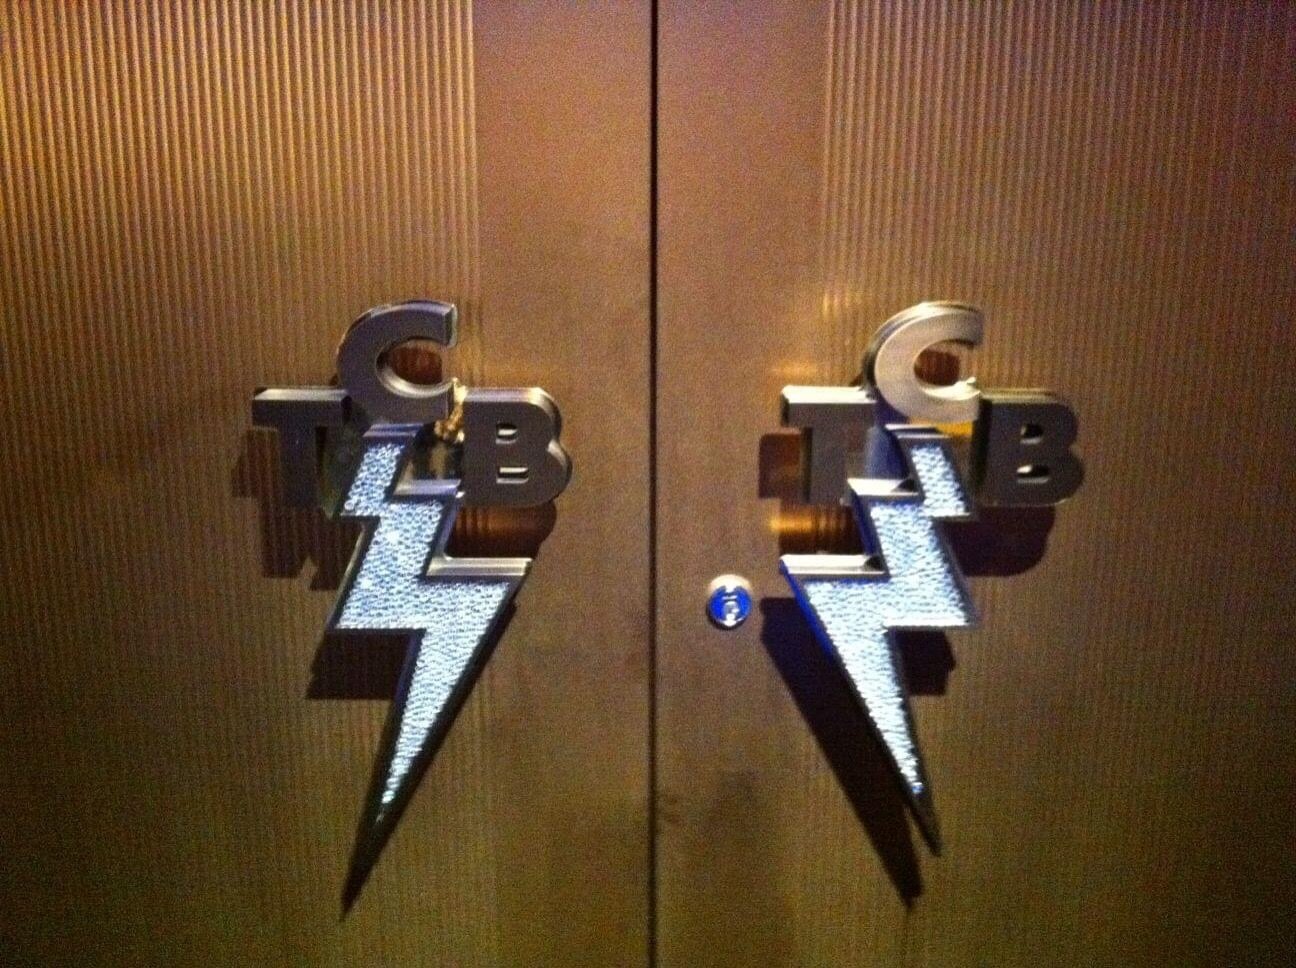 During our Studio E event this week we shared some photos from the &lsquo;Viva Elvis&rsquo; Cirque Du Soleil show at the Aria Hotel in Las Vegas that had very cool door handles to the theater.  TCB⚡

Unfortunately the show only lasted from February 2